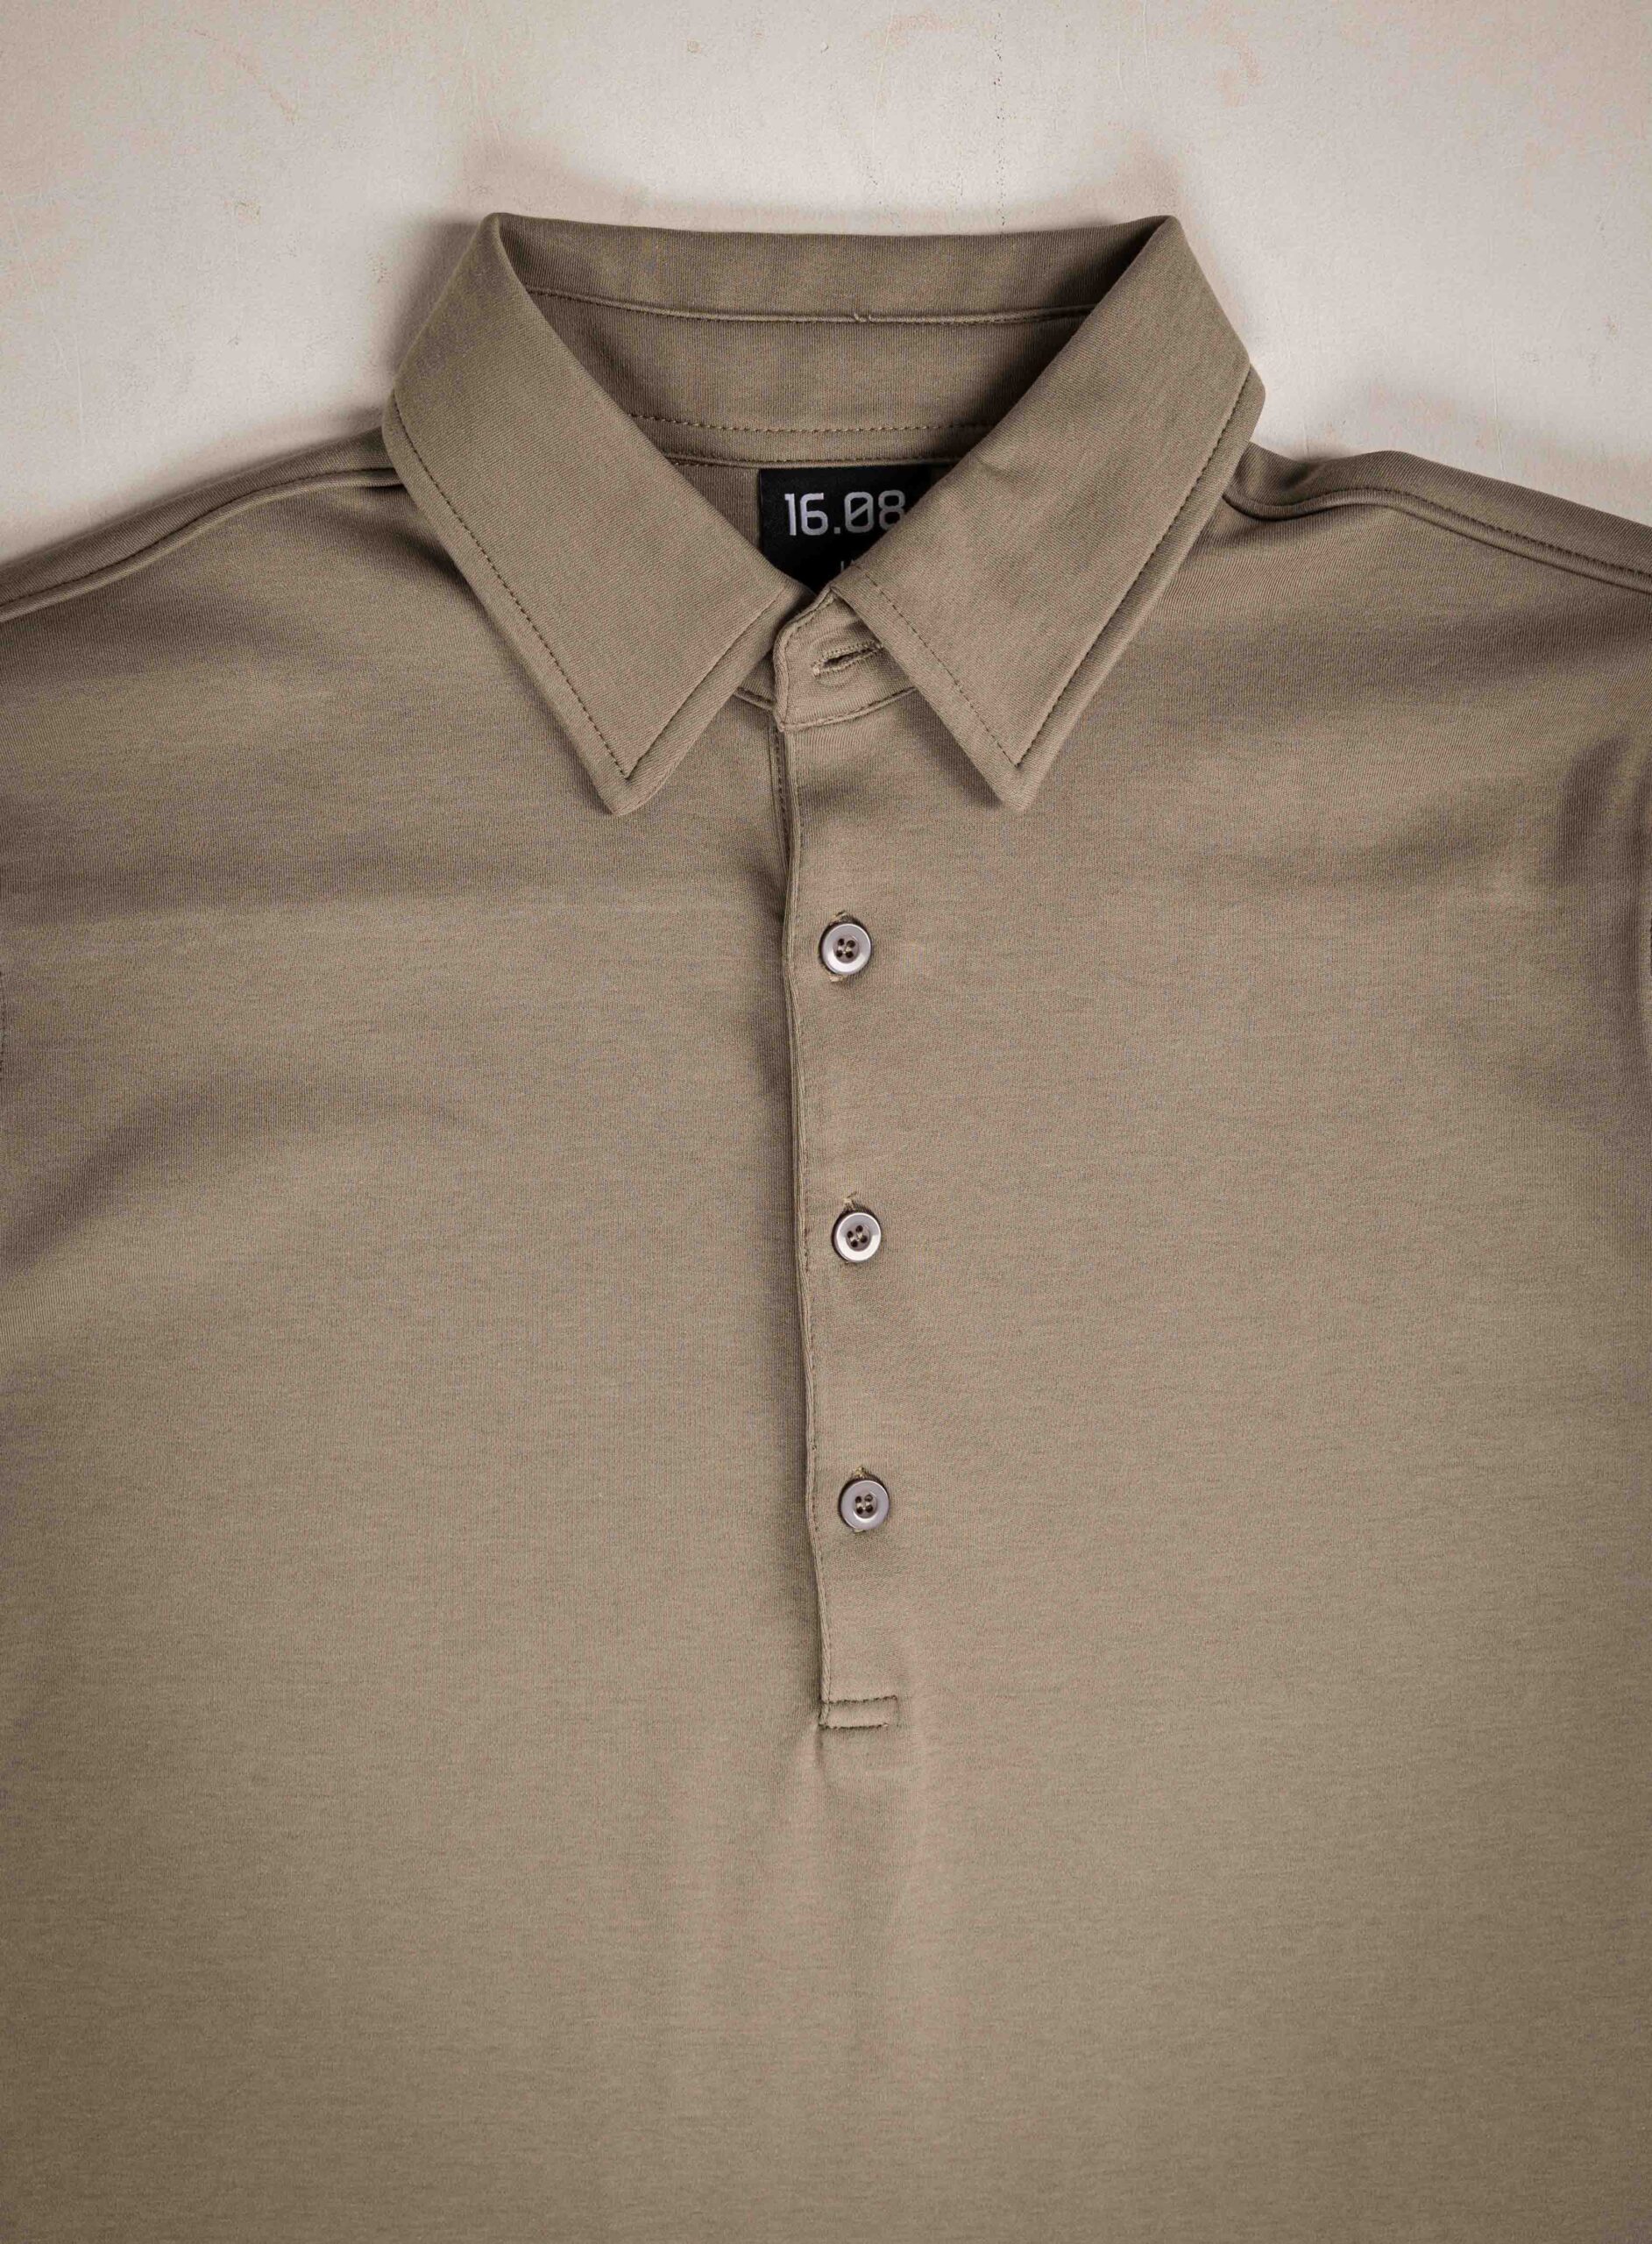 Olive Business Polo 1608 WEAR